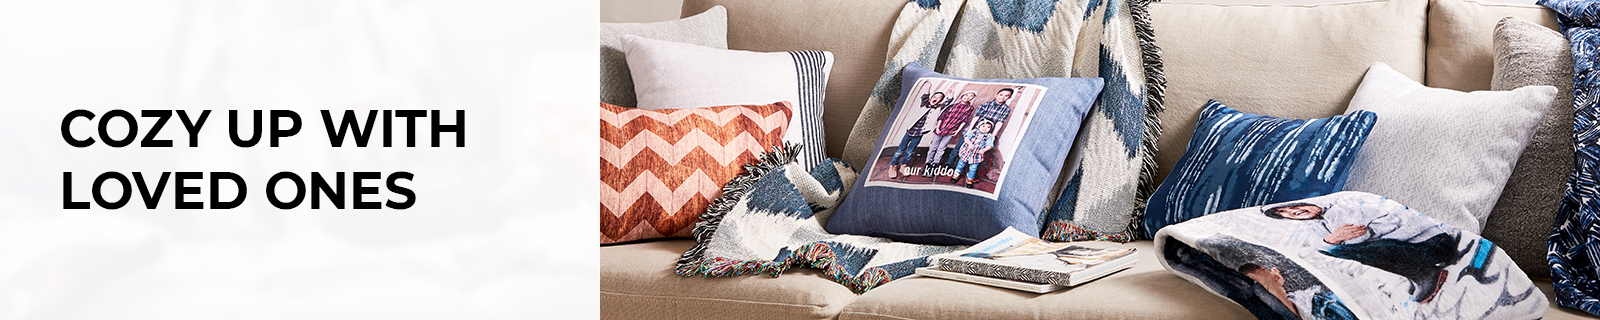 Custom Blankets and Pillows | Shutterfly